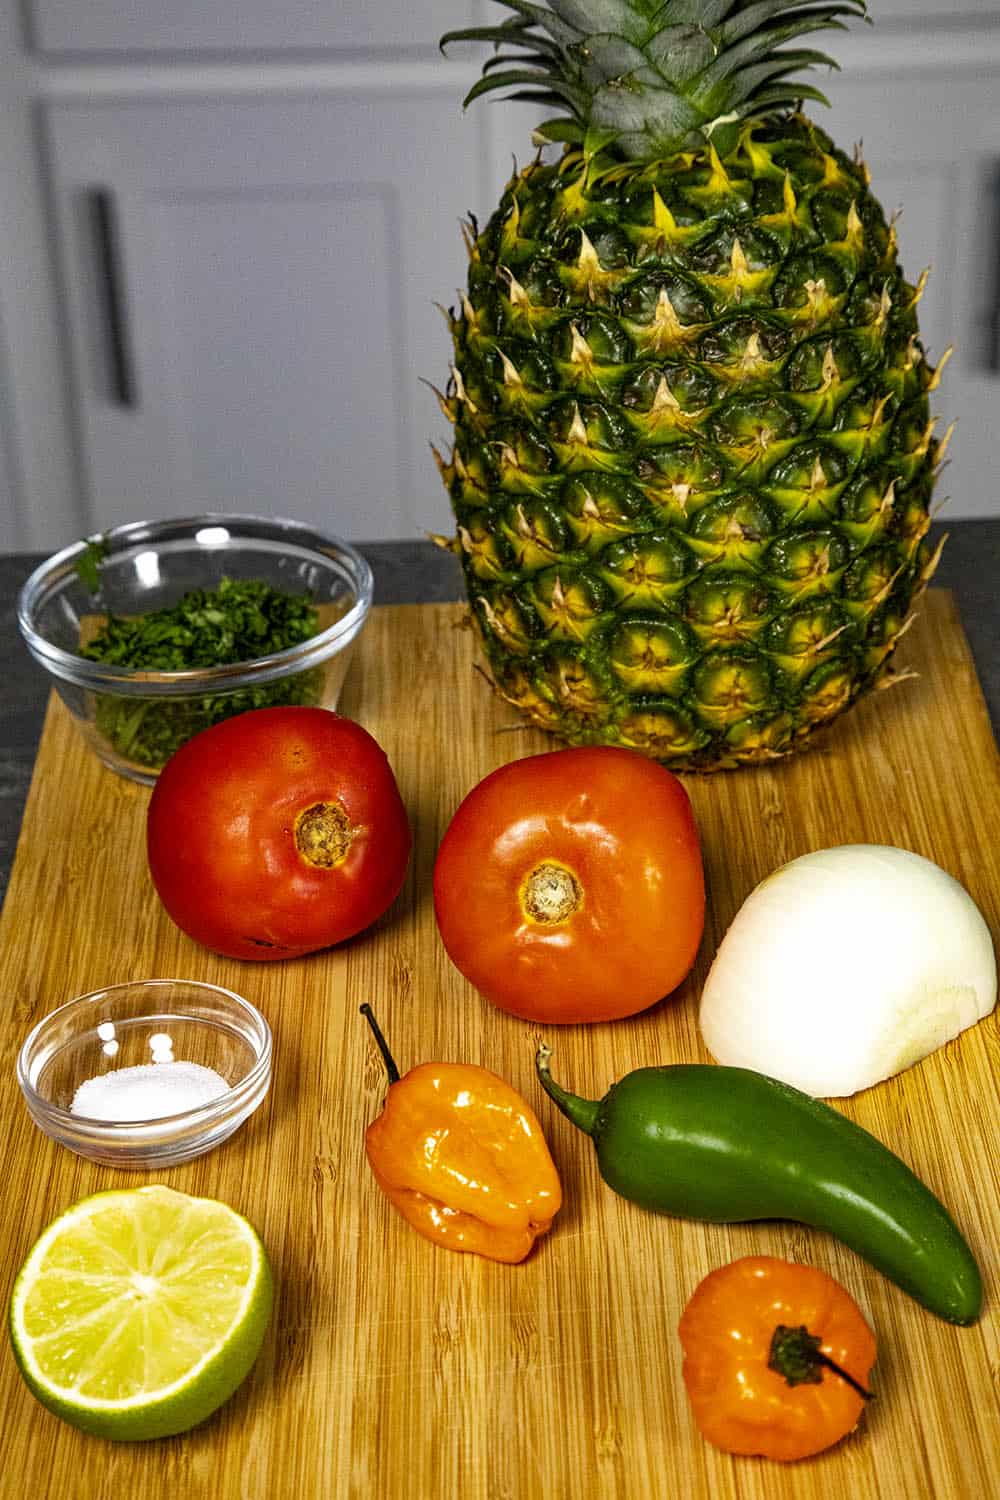 Ingredients to make Spicy Pineapple Salsa